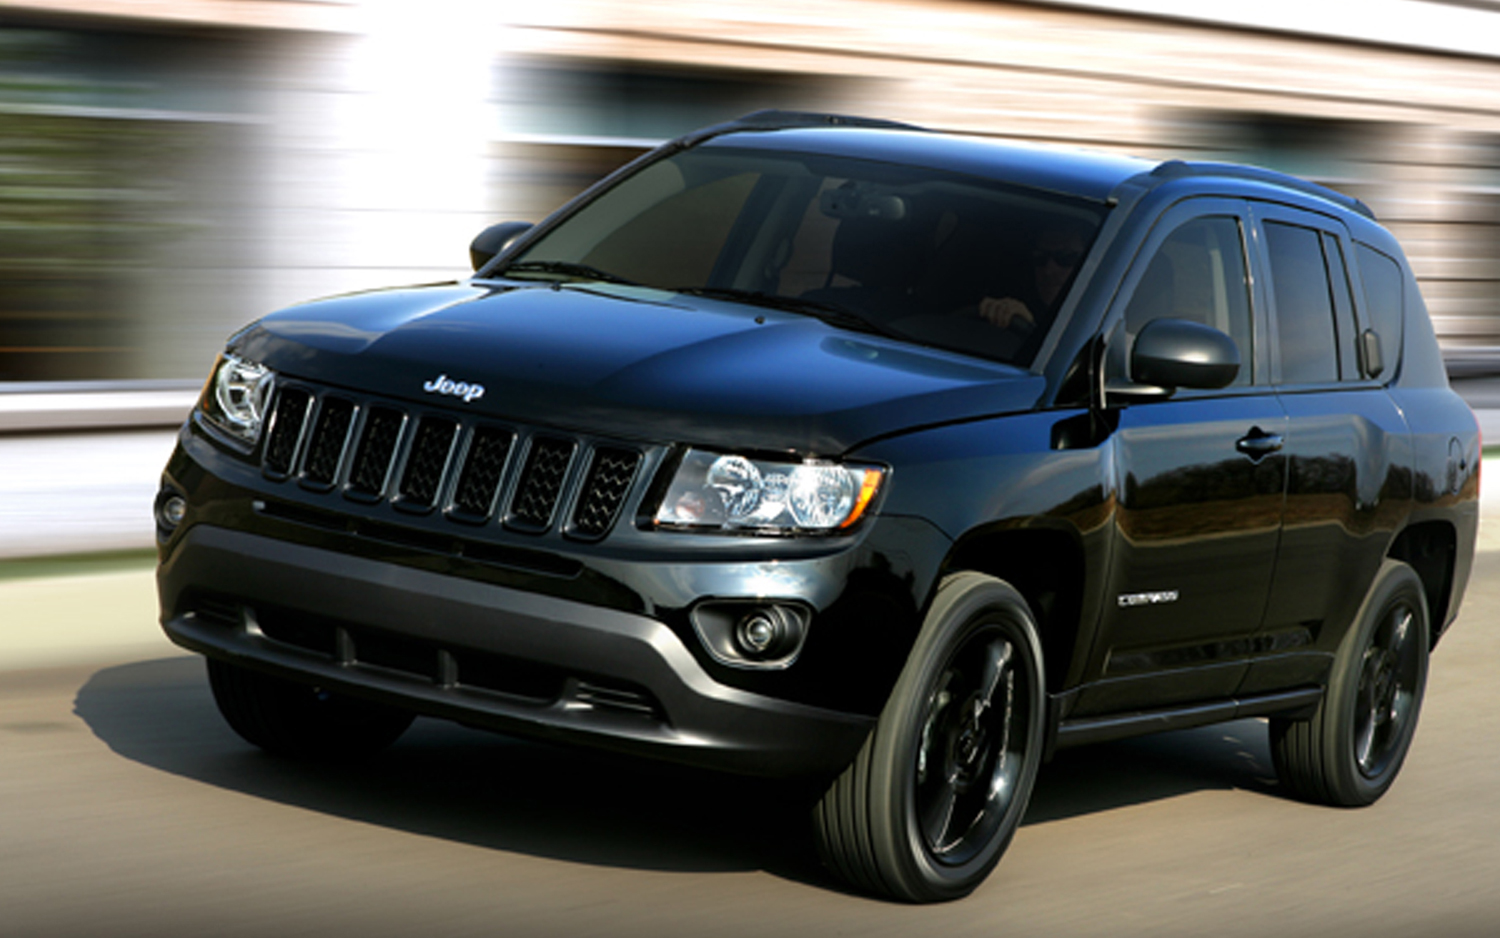 2012 Jeep Compass Information and photos MOMENTcar